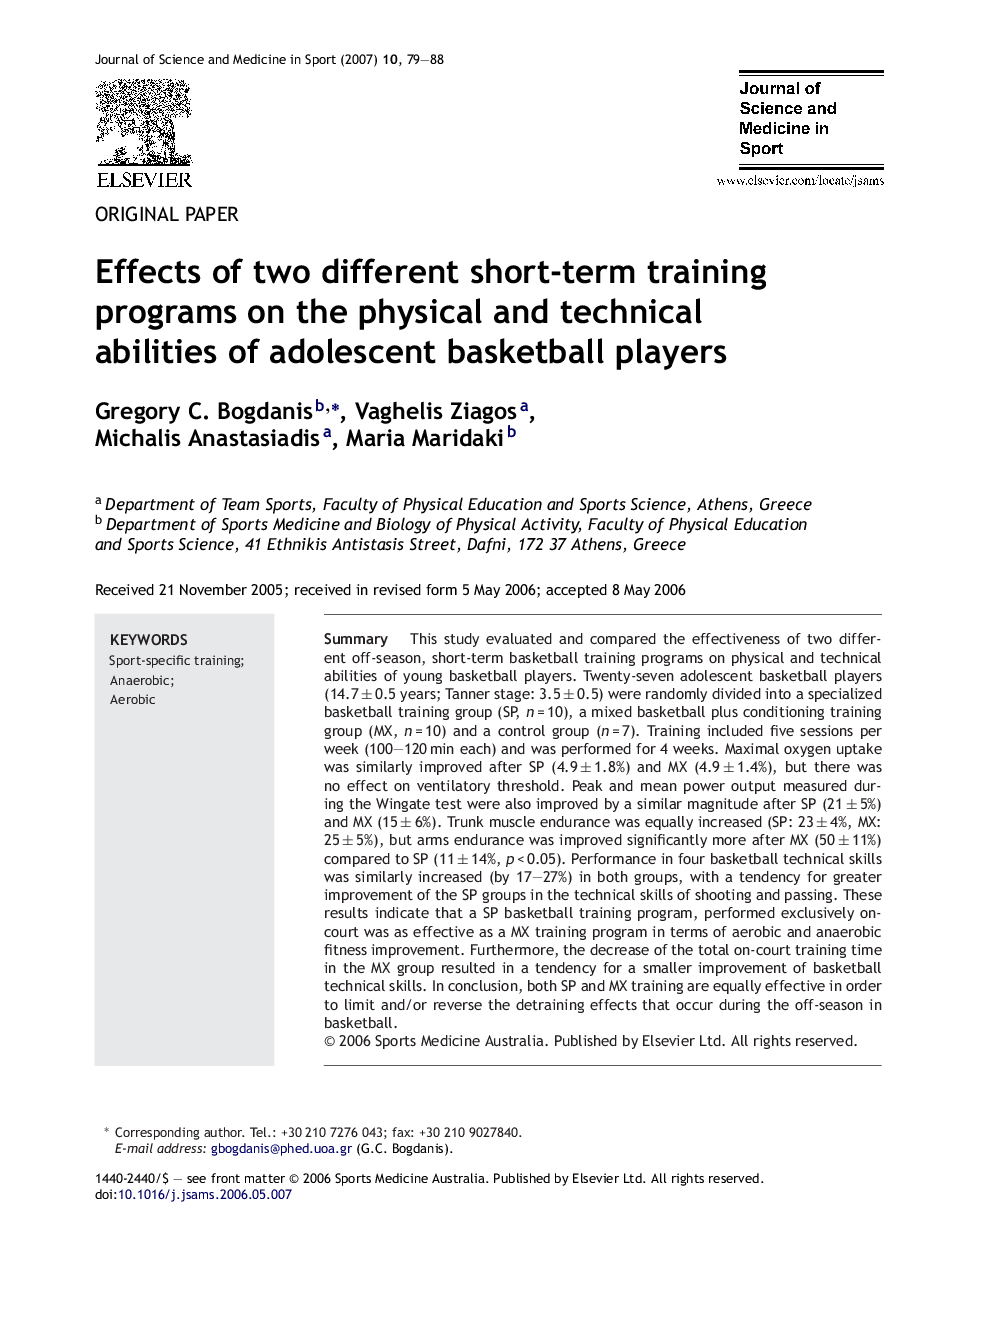 Effects of two different short-term training programs on the physical and technical abilities of adolescent basketball players